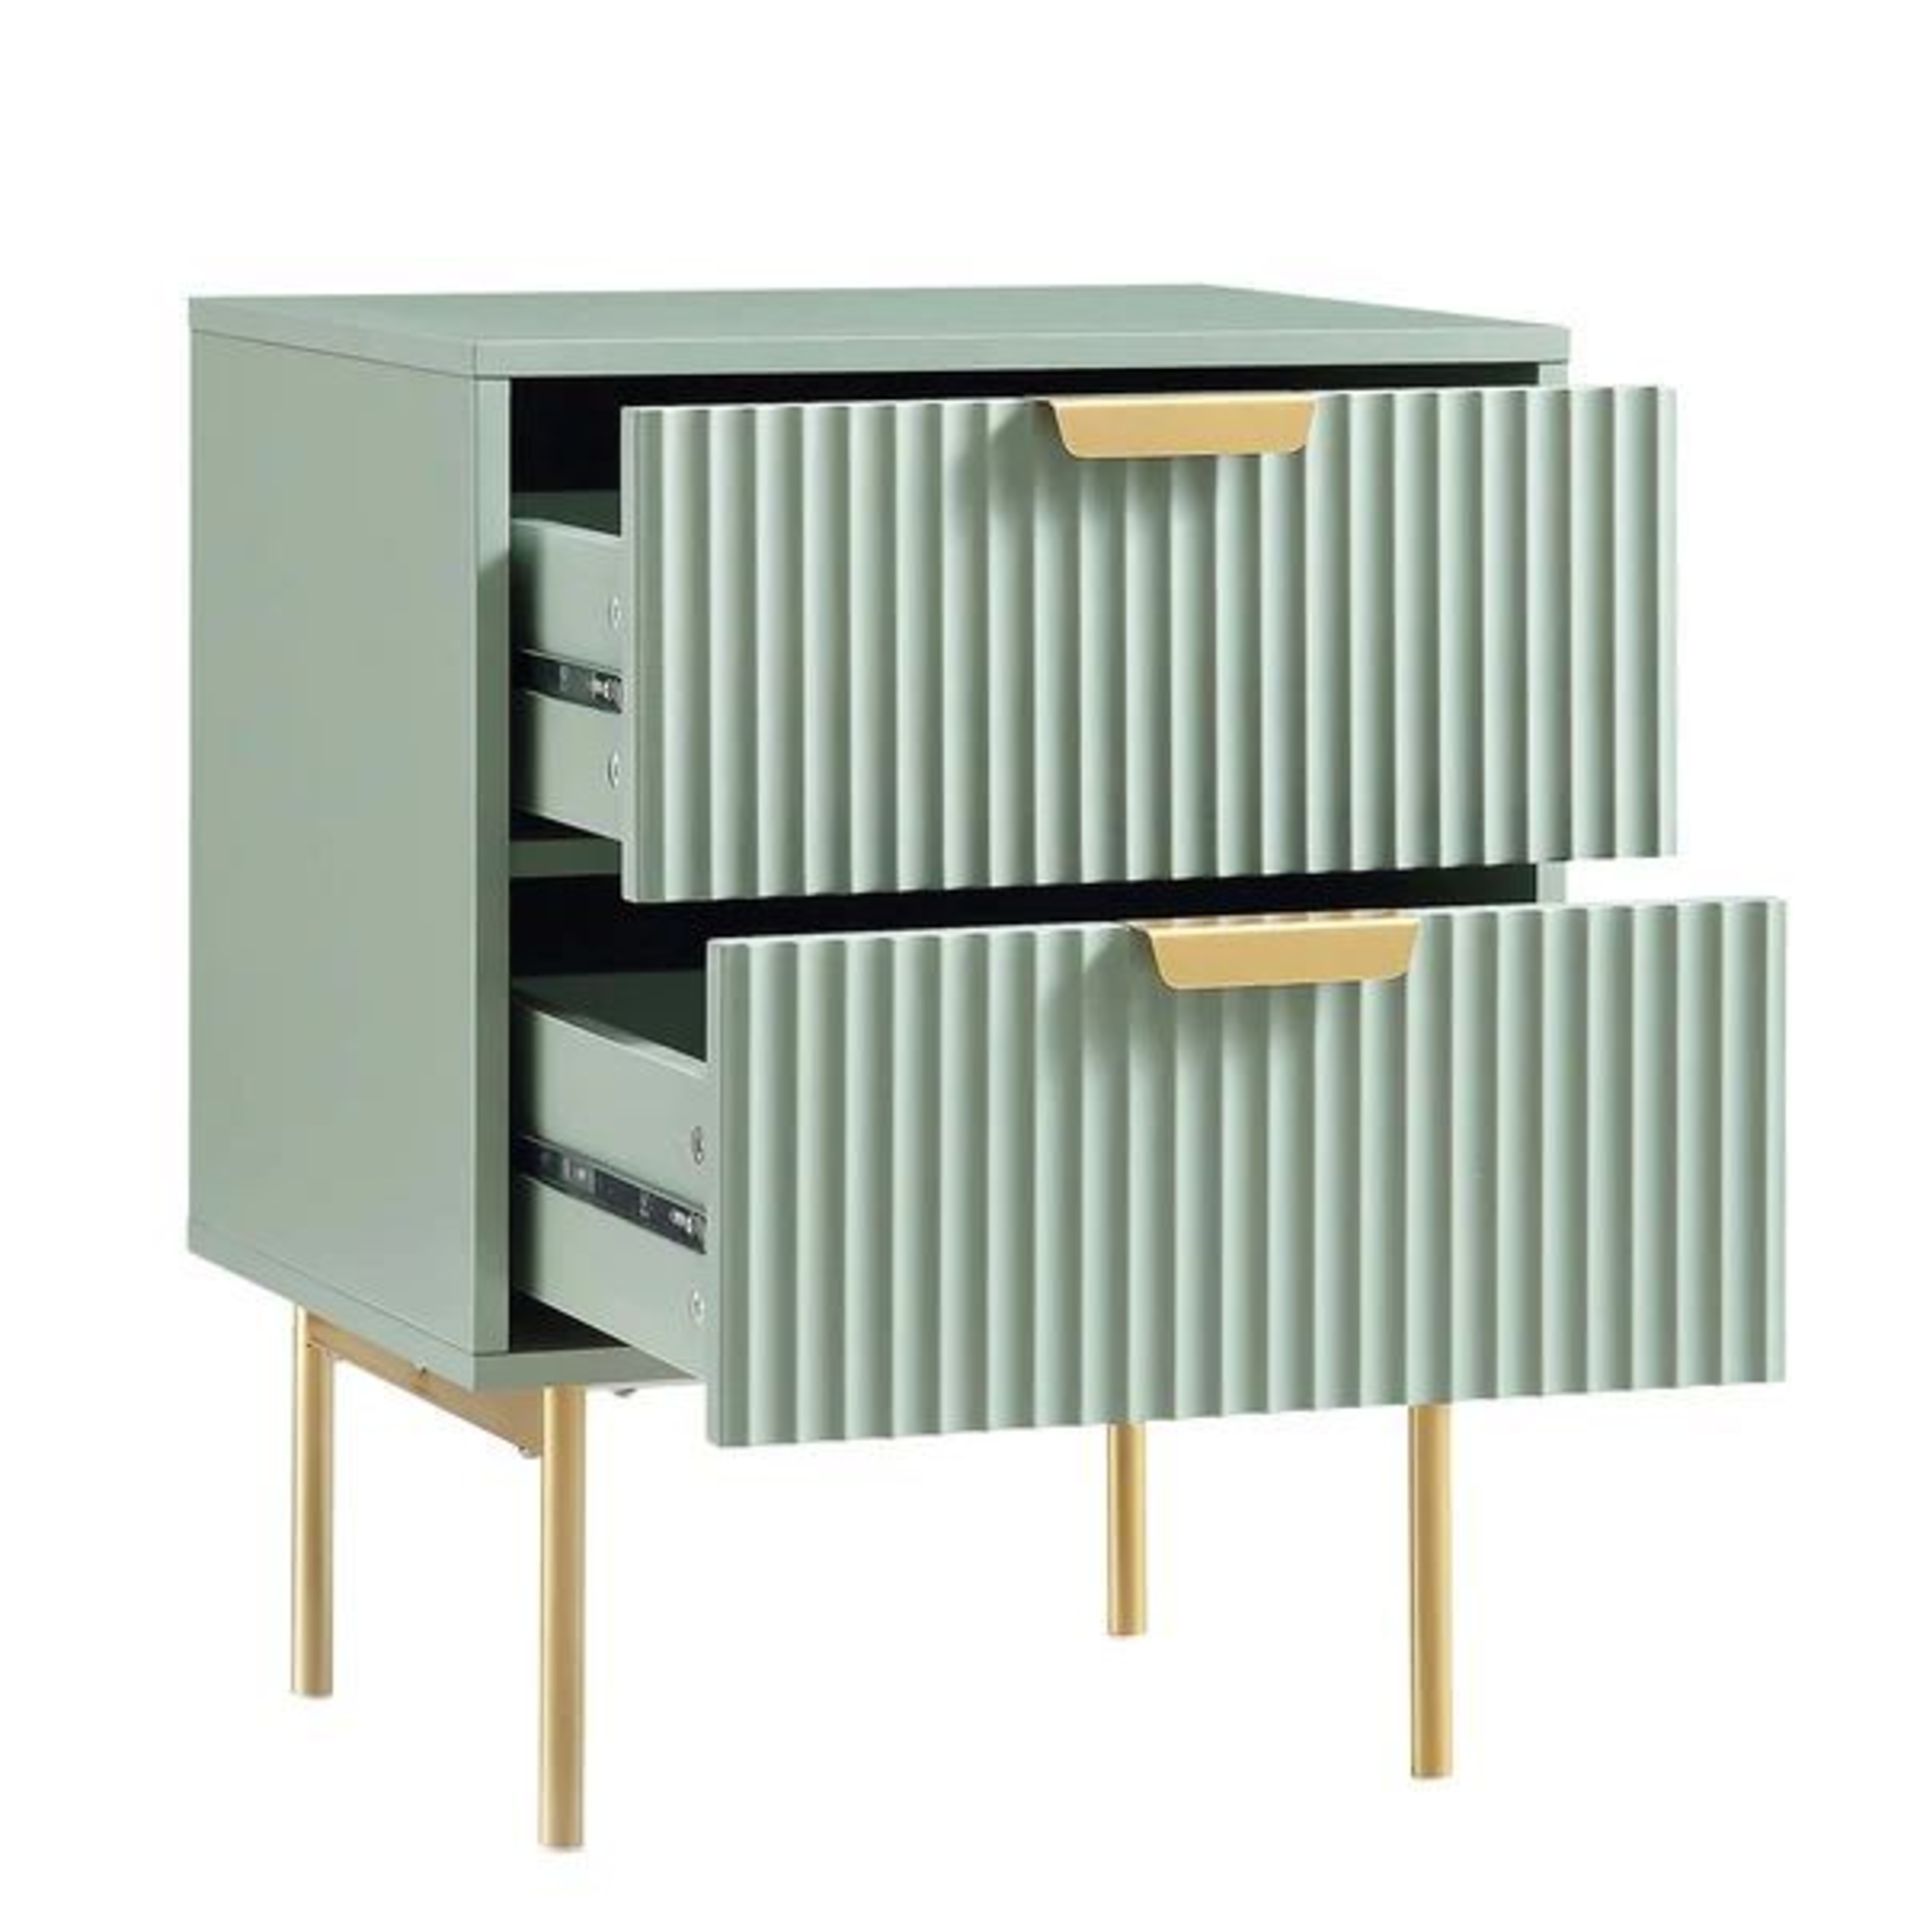 Richmond Ridged 2 Drawer Bedside Table, Matte Sage Green. - ER29. RRP £149.99. Our Richmond - Image 4 of 4